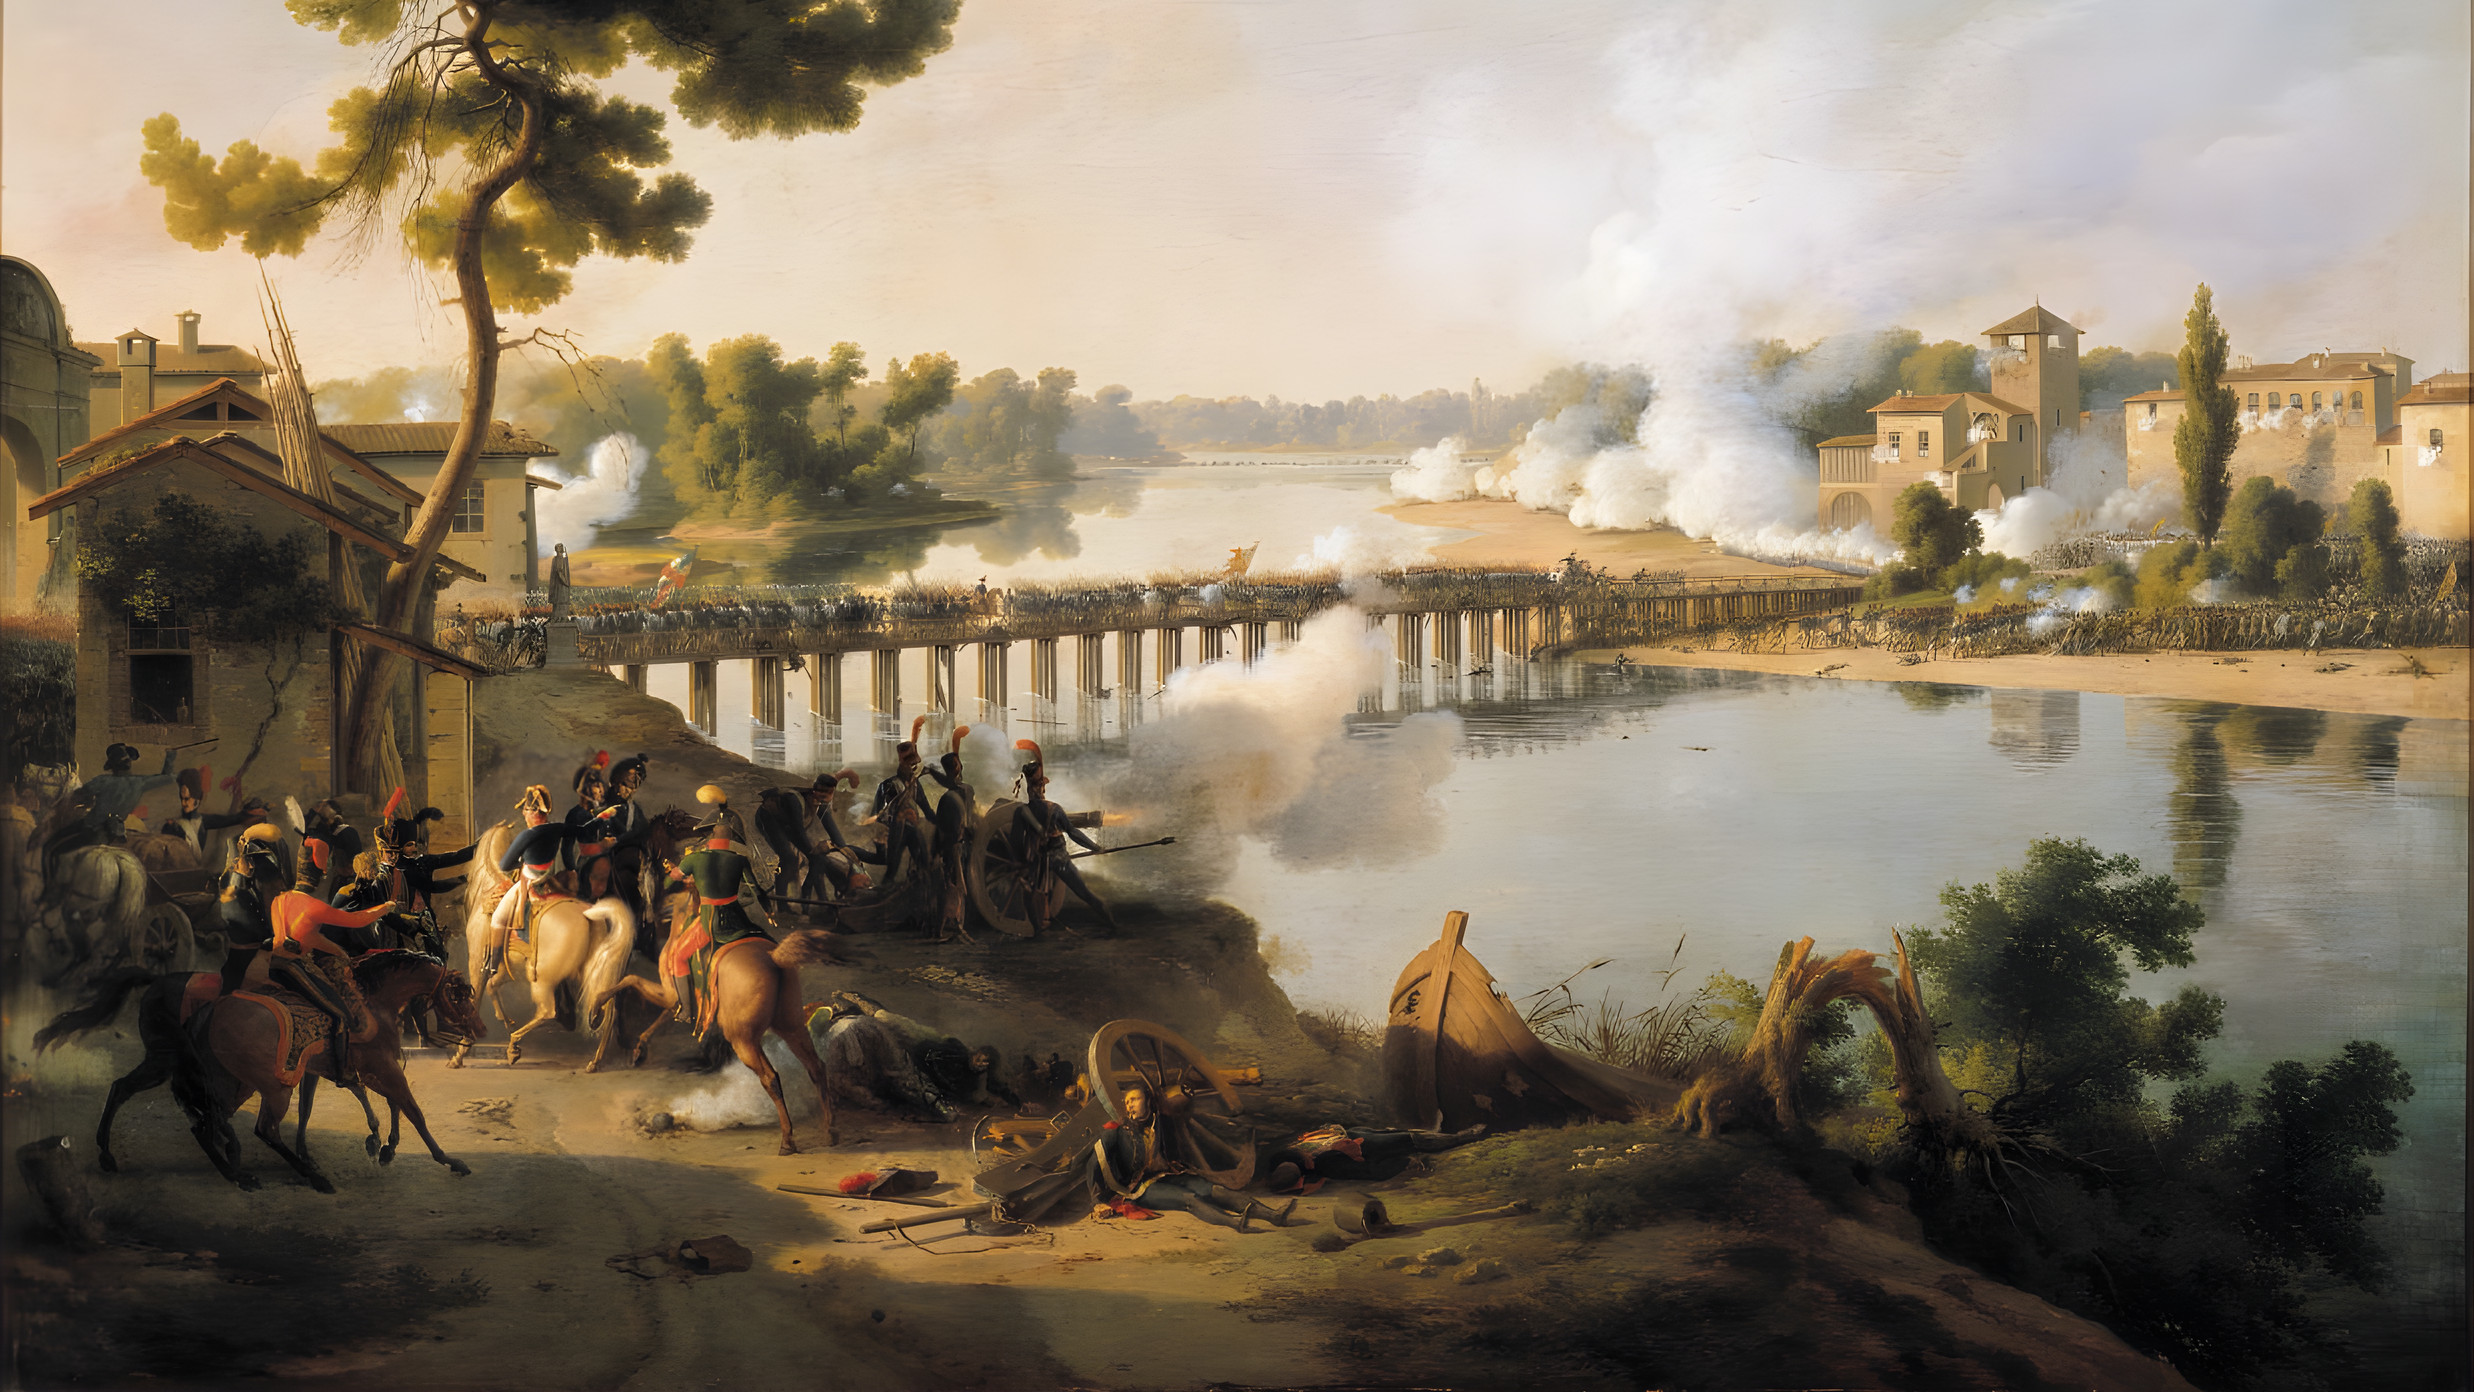 Napoleon Bonaparte, commanding the French Army of Italy, issues orders during an assault over a bridge at Lodi. At one point in the struggle, Bonaparte led a charge himself. The victory here gave much confidence to both commander and army.